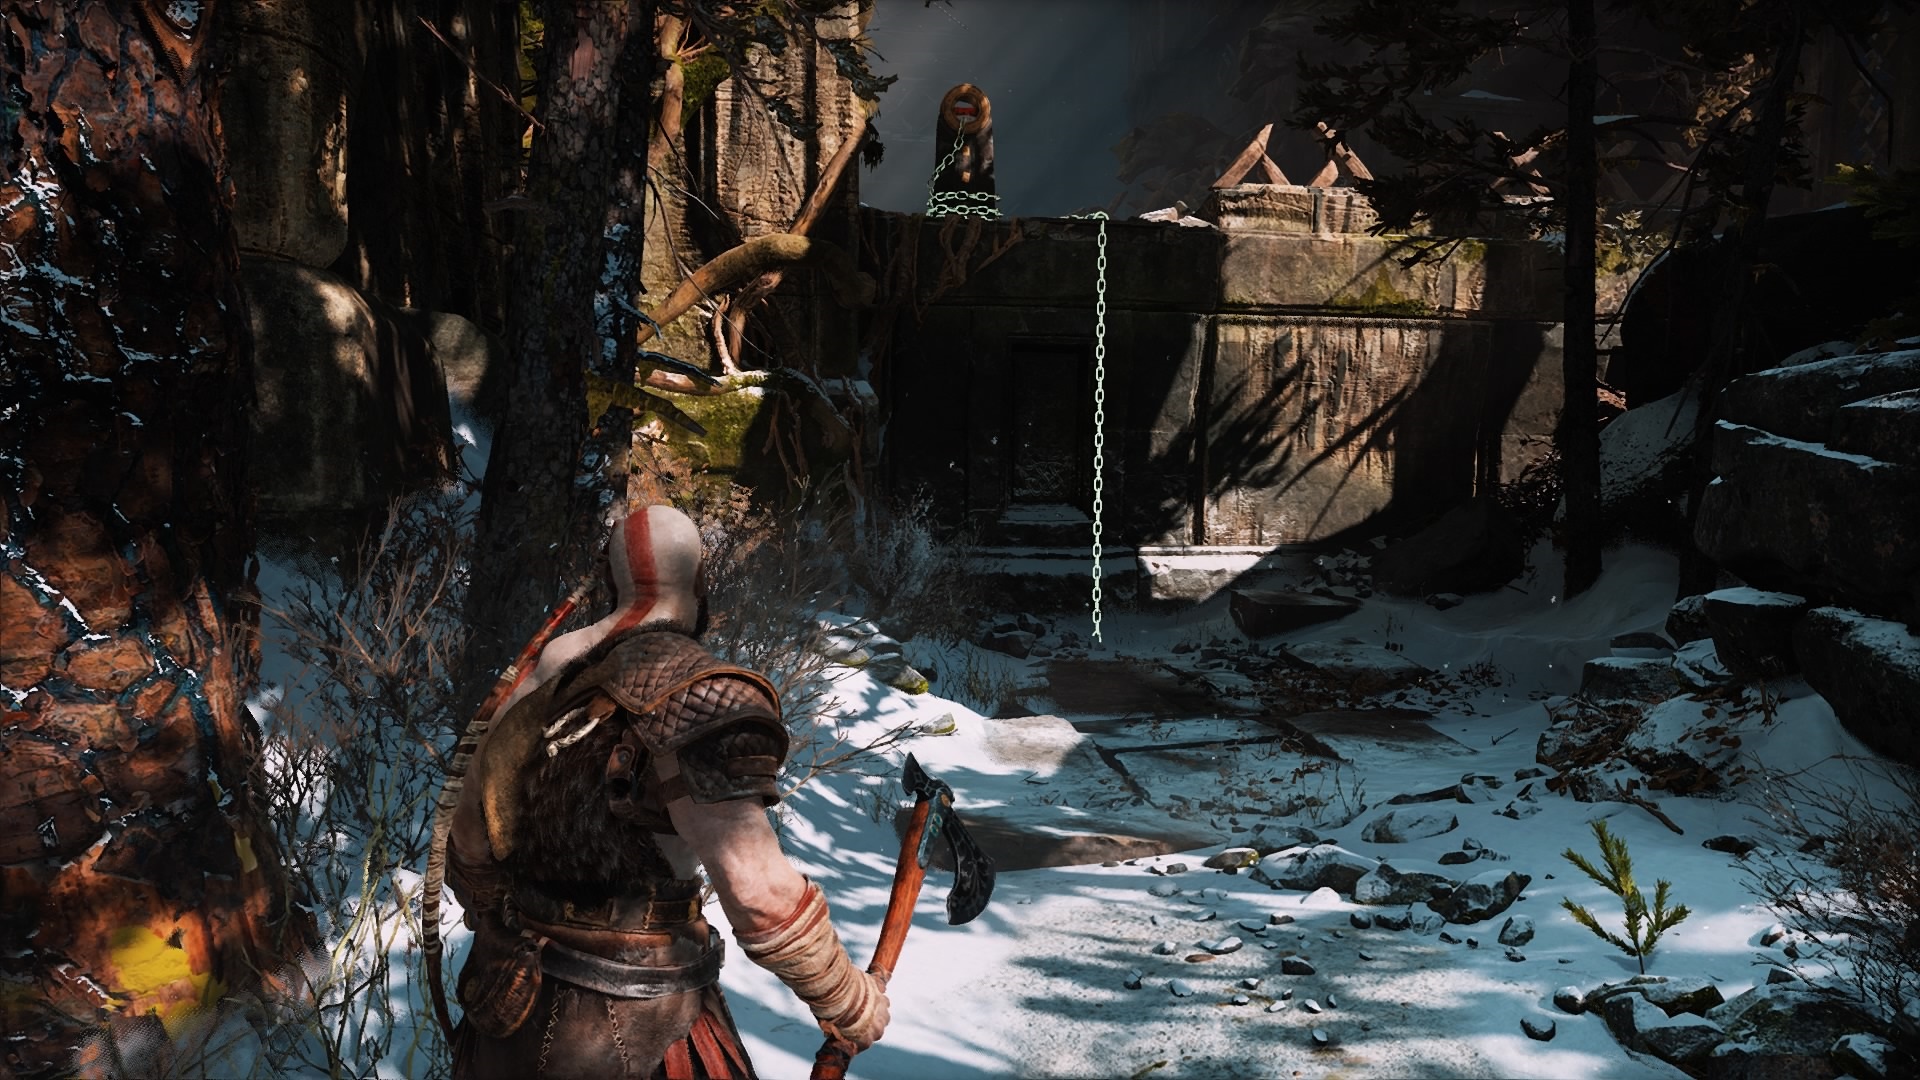 Has anyone deciphered the meaning of the broken Jotnar Shrine with